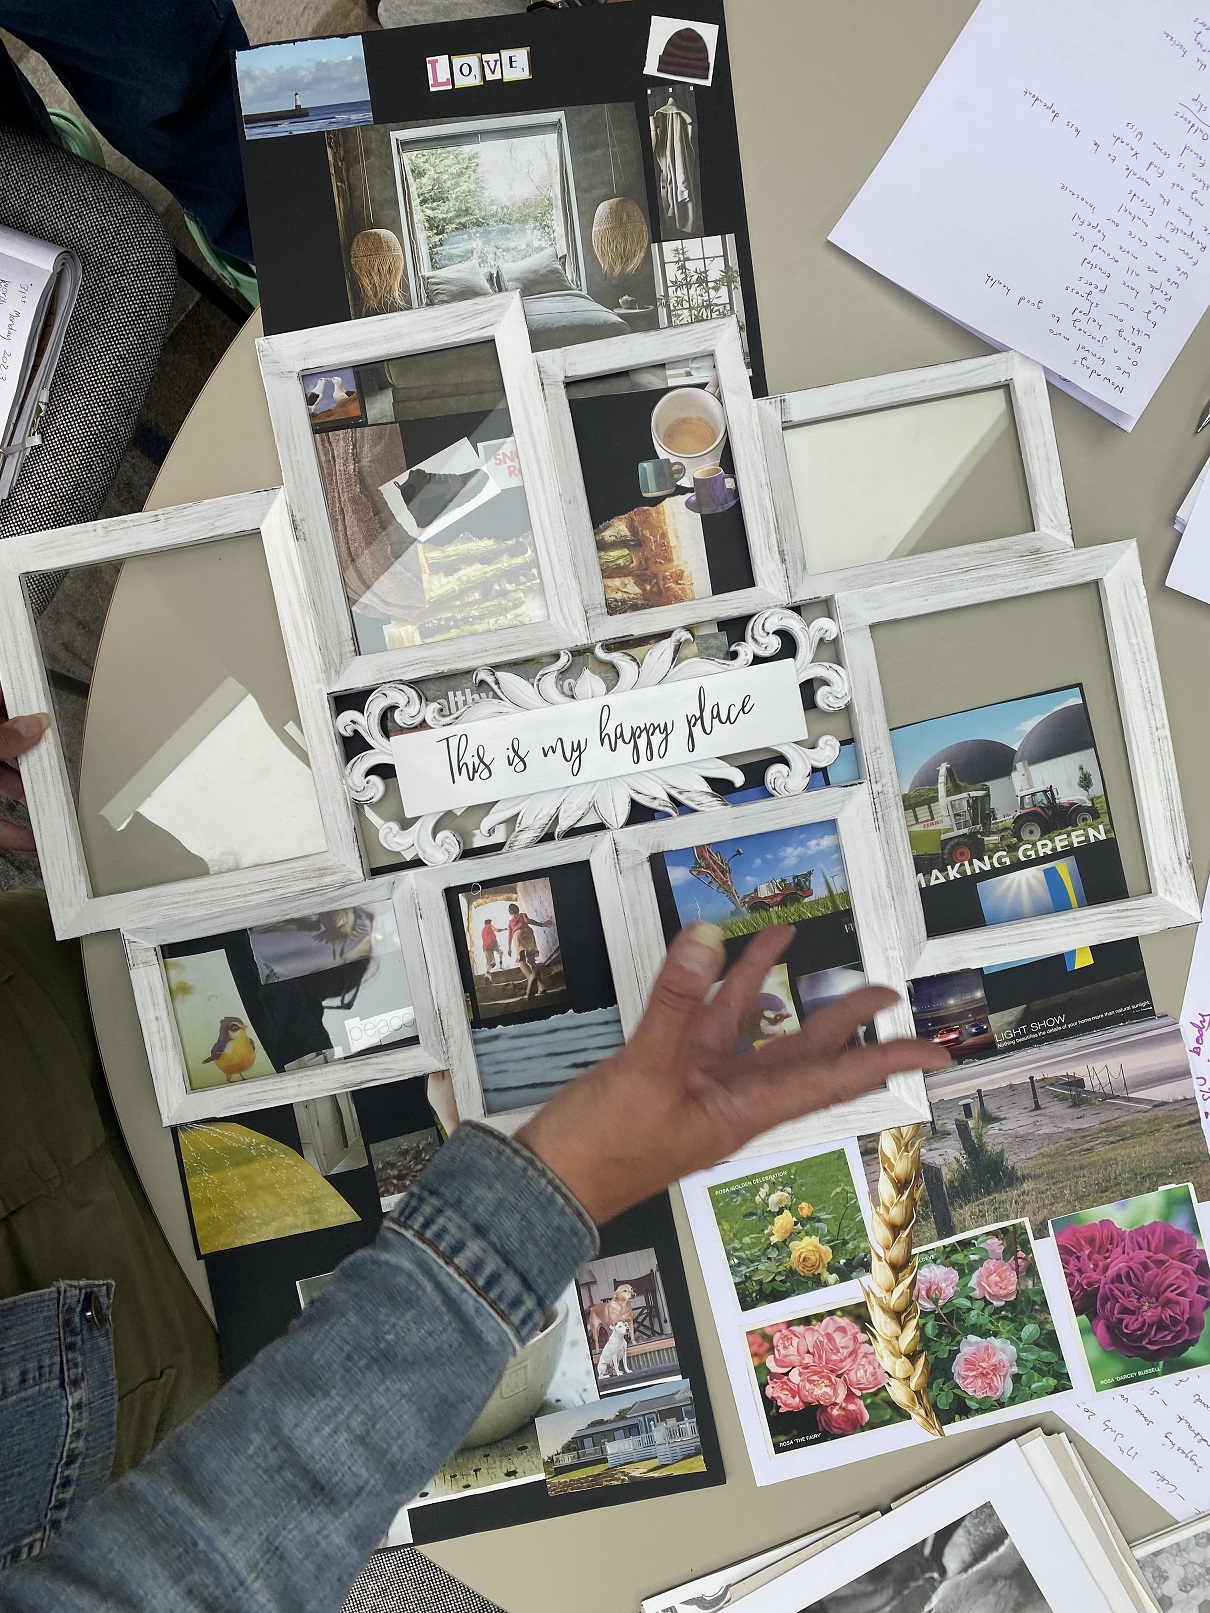 A hand in front of a photo frame filled with some images. The central image contains text that says 'this is my happy place'.